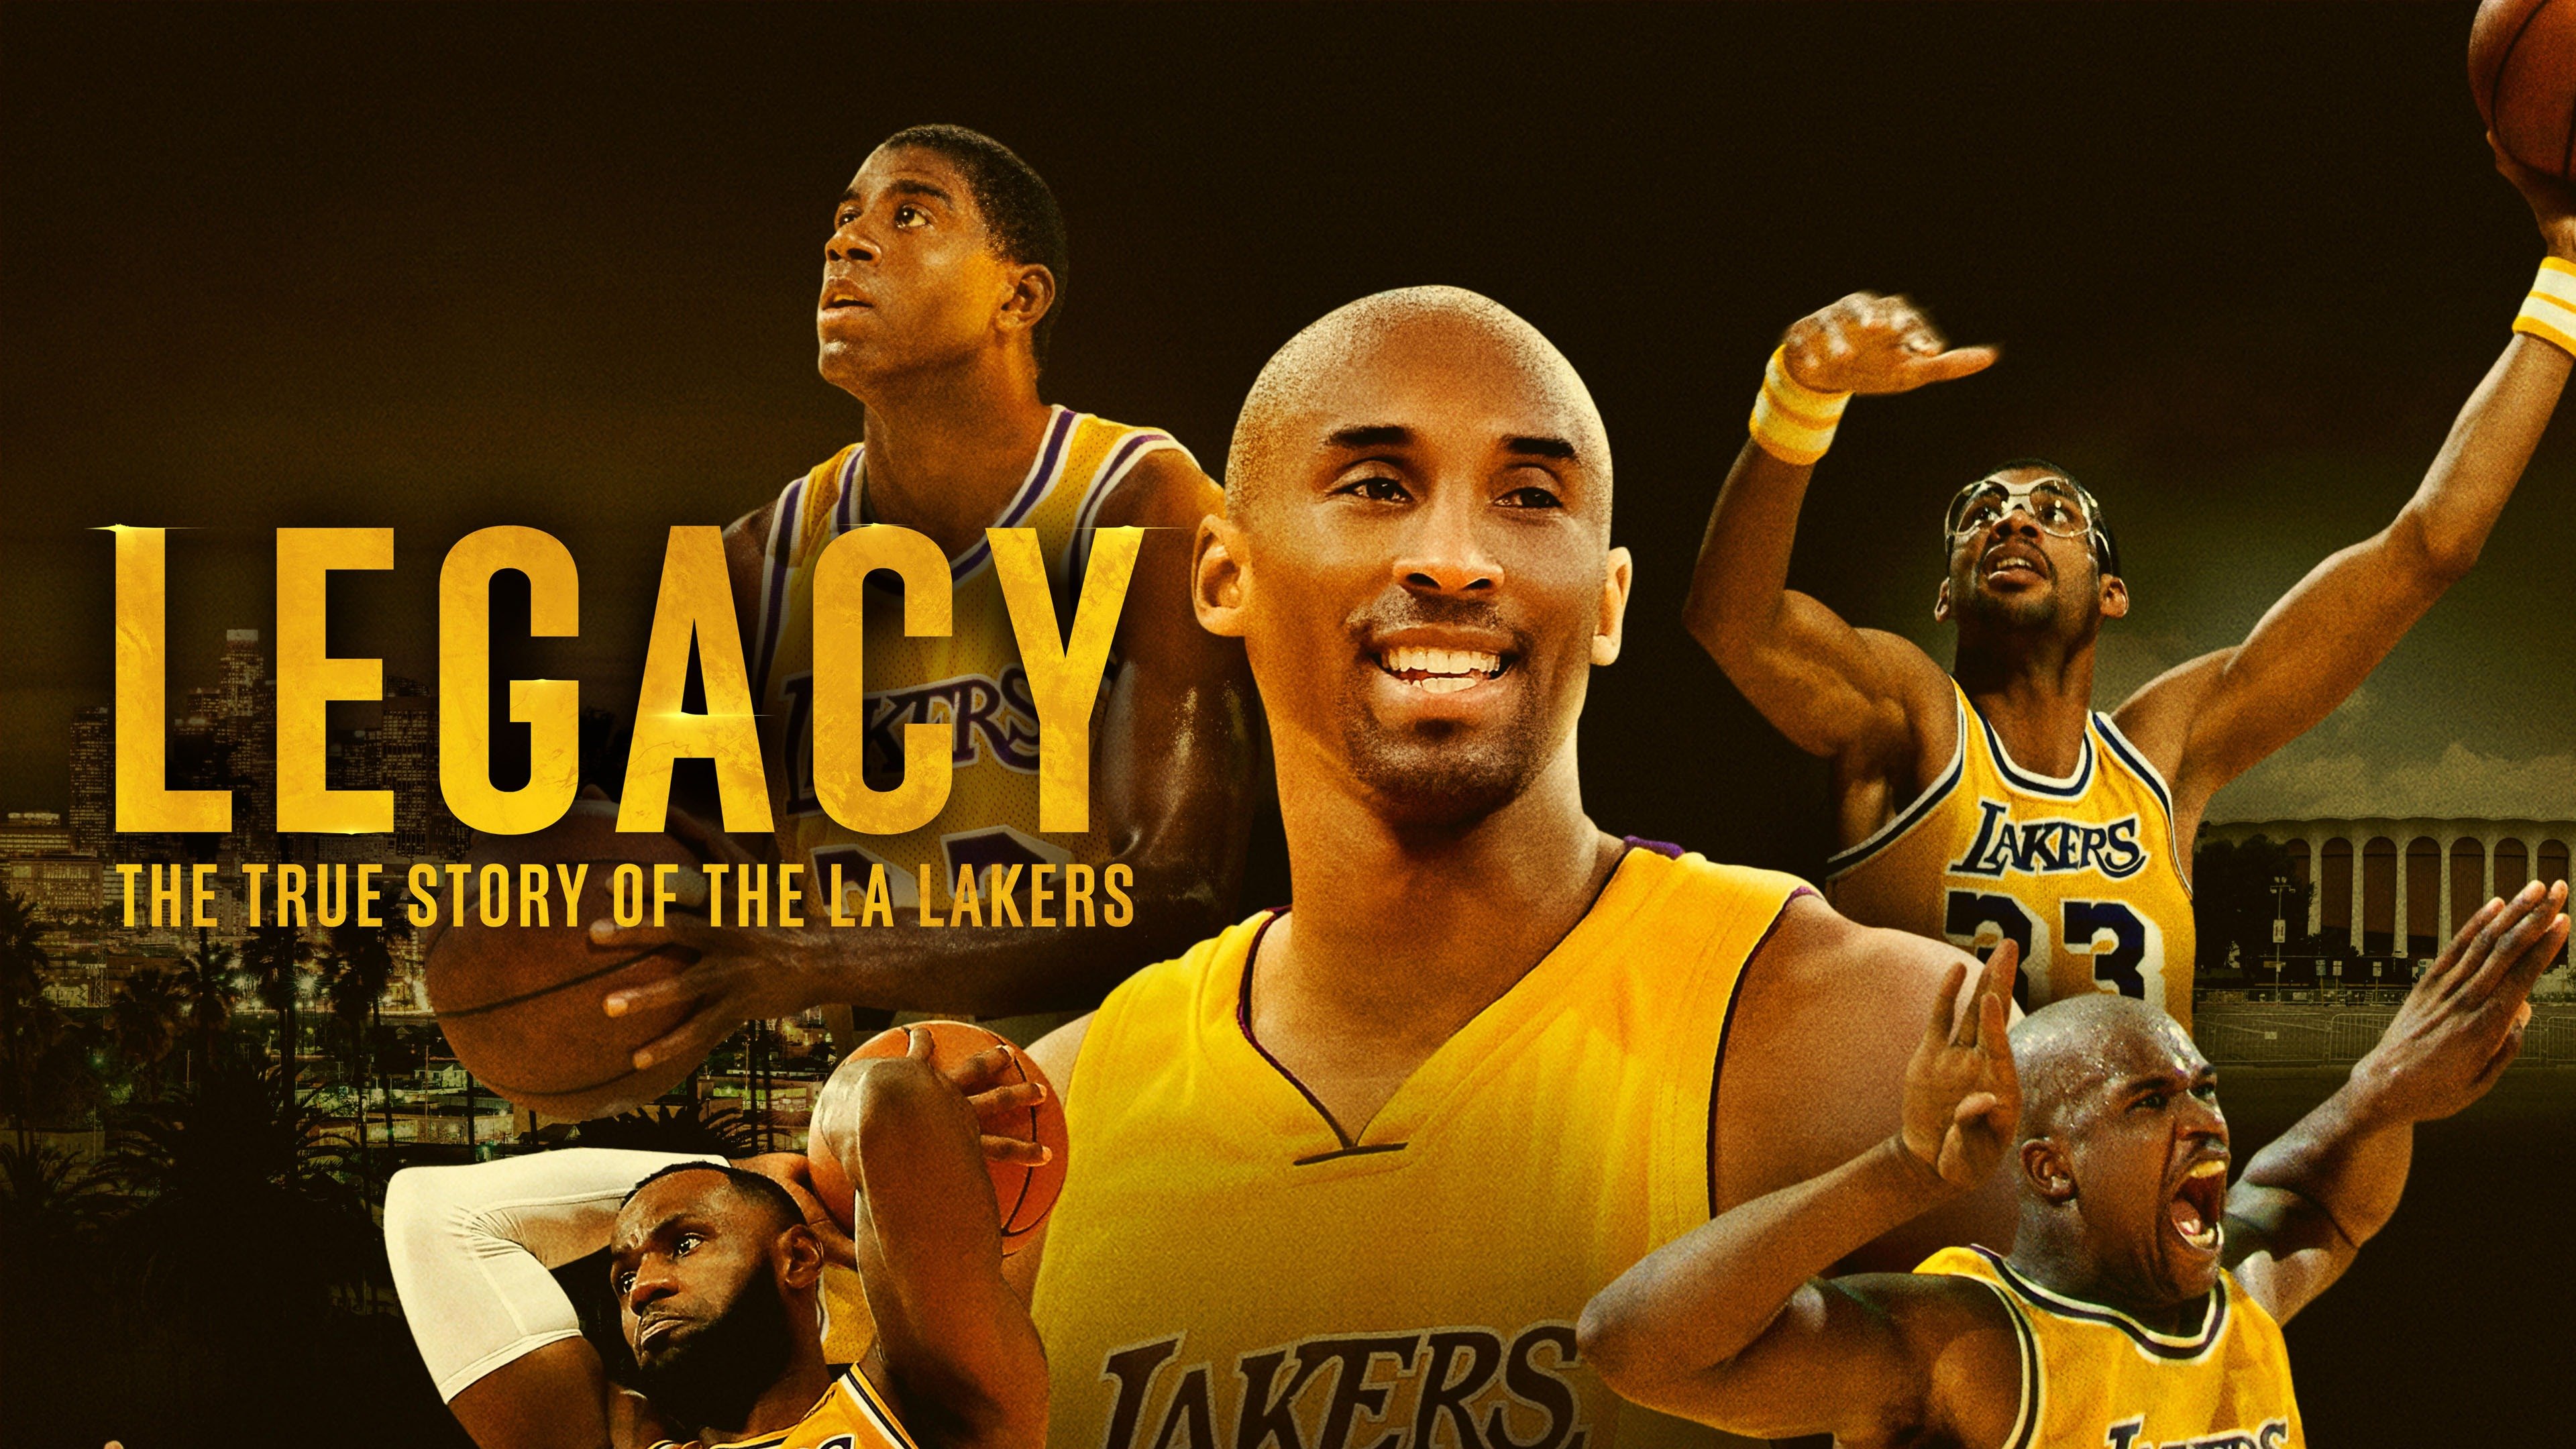 Legacy The True Story of the LA Lakers - Hulu Docuseries